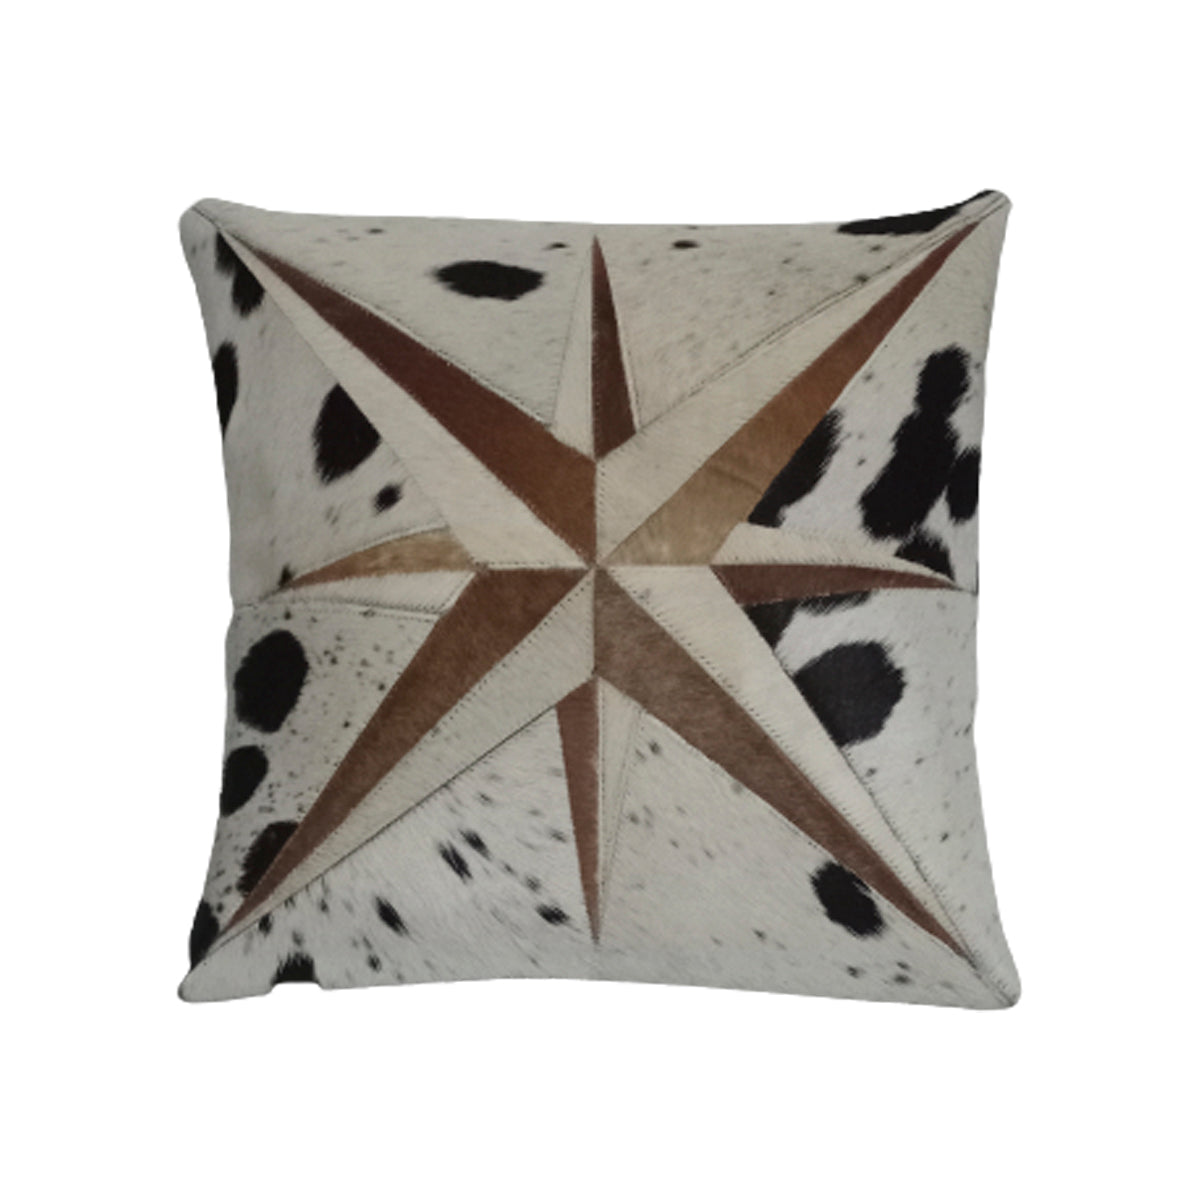 Cowhide Leather Bianca Cushion Cover